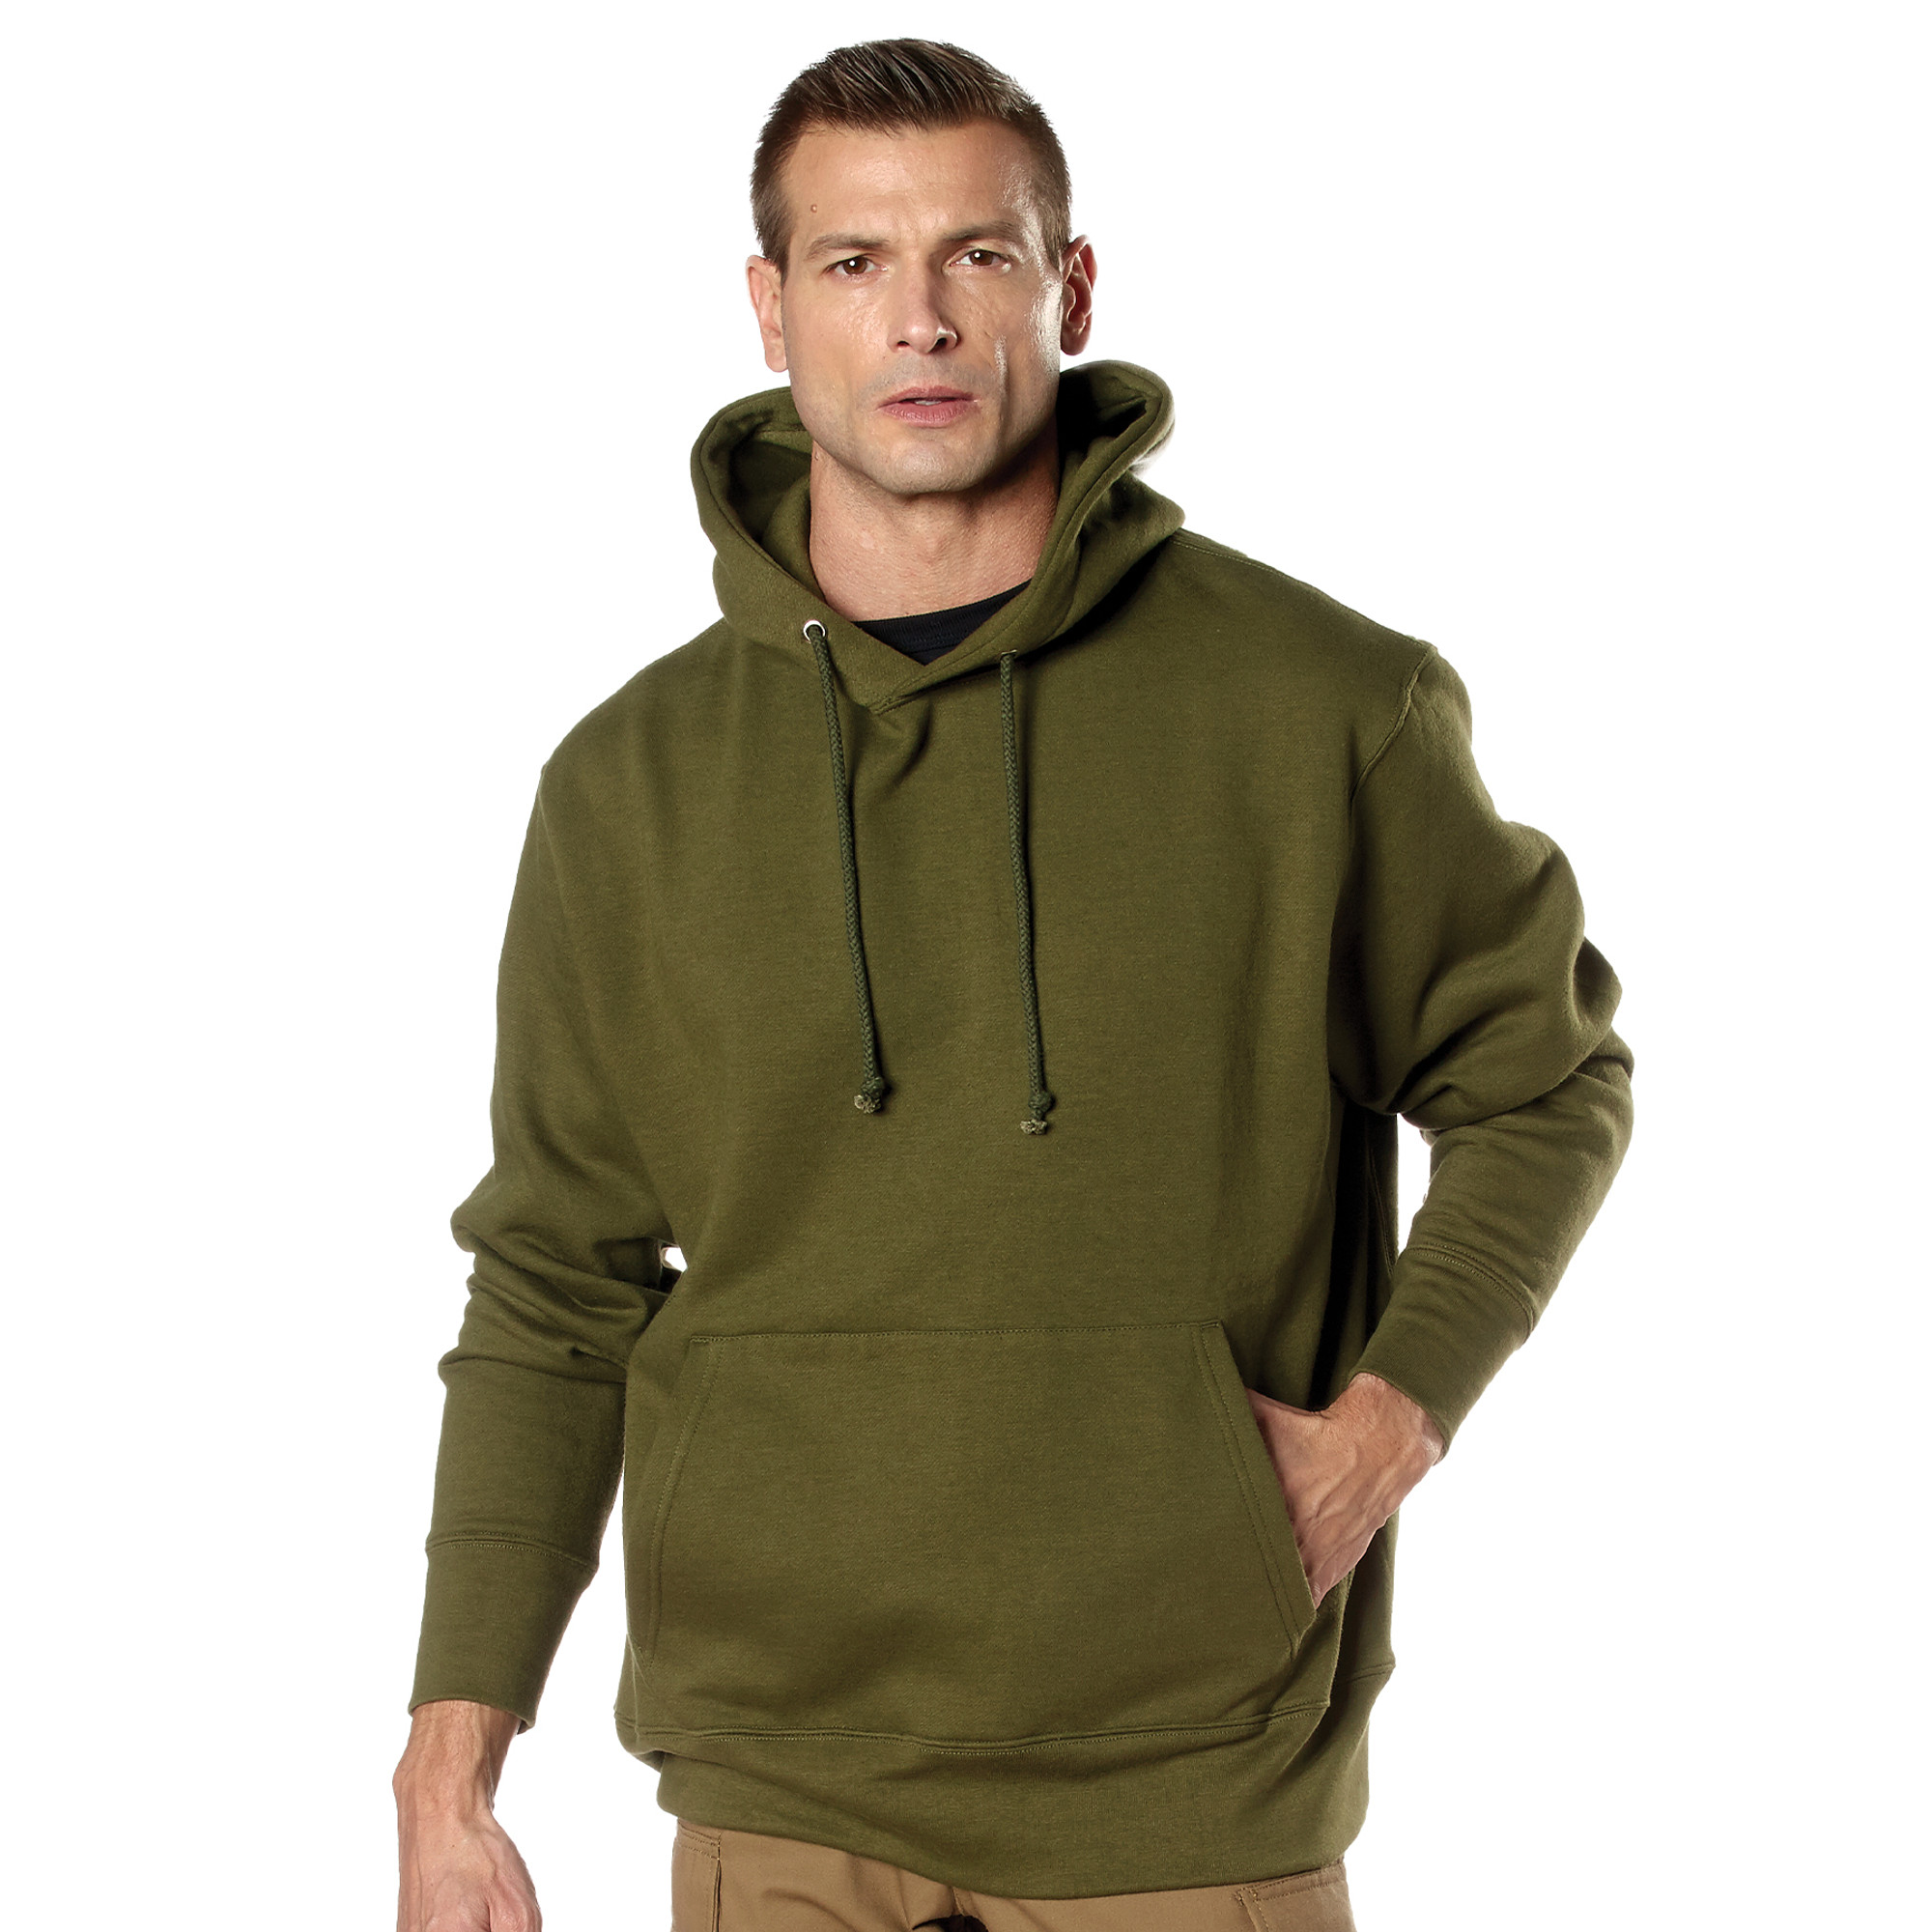 Rothco Every Day Pullover Hooded Sweatshirt - Olive Drab